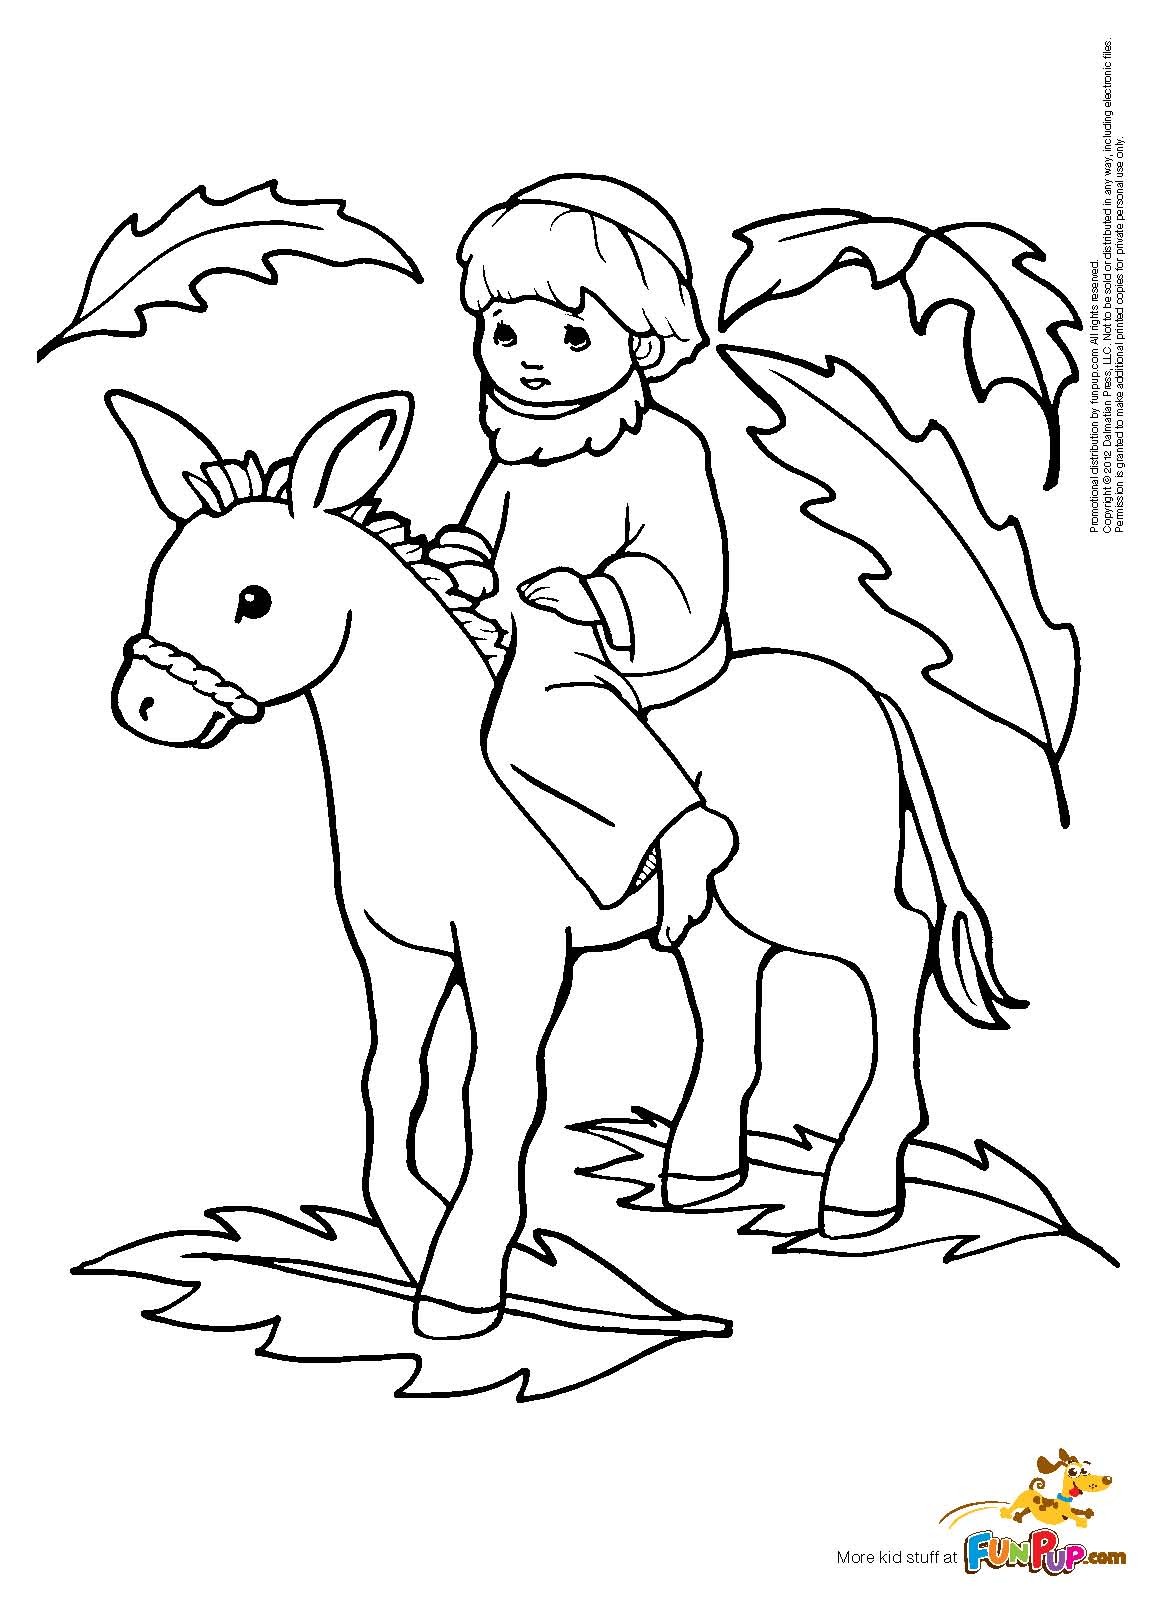 Palm Sunday Coloring Pages For Preschoolers | Coloring Page